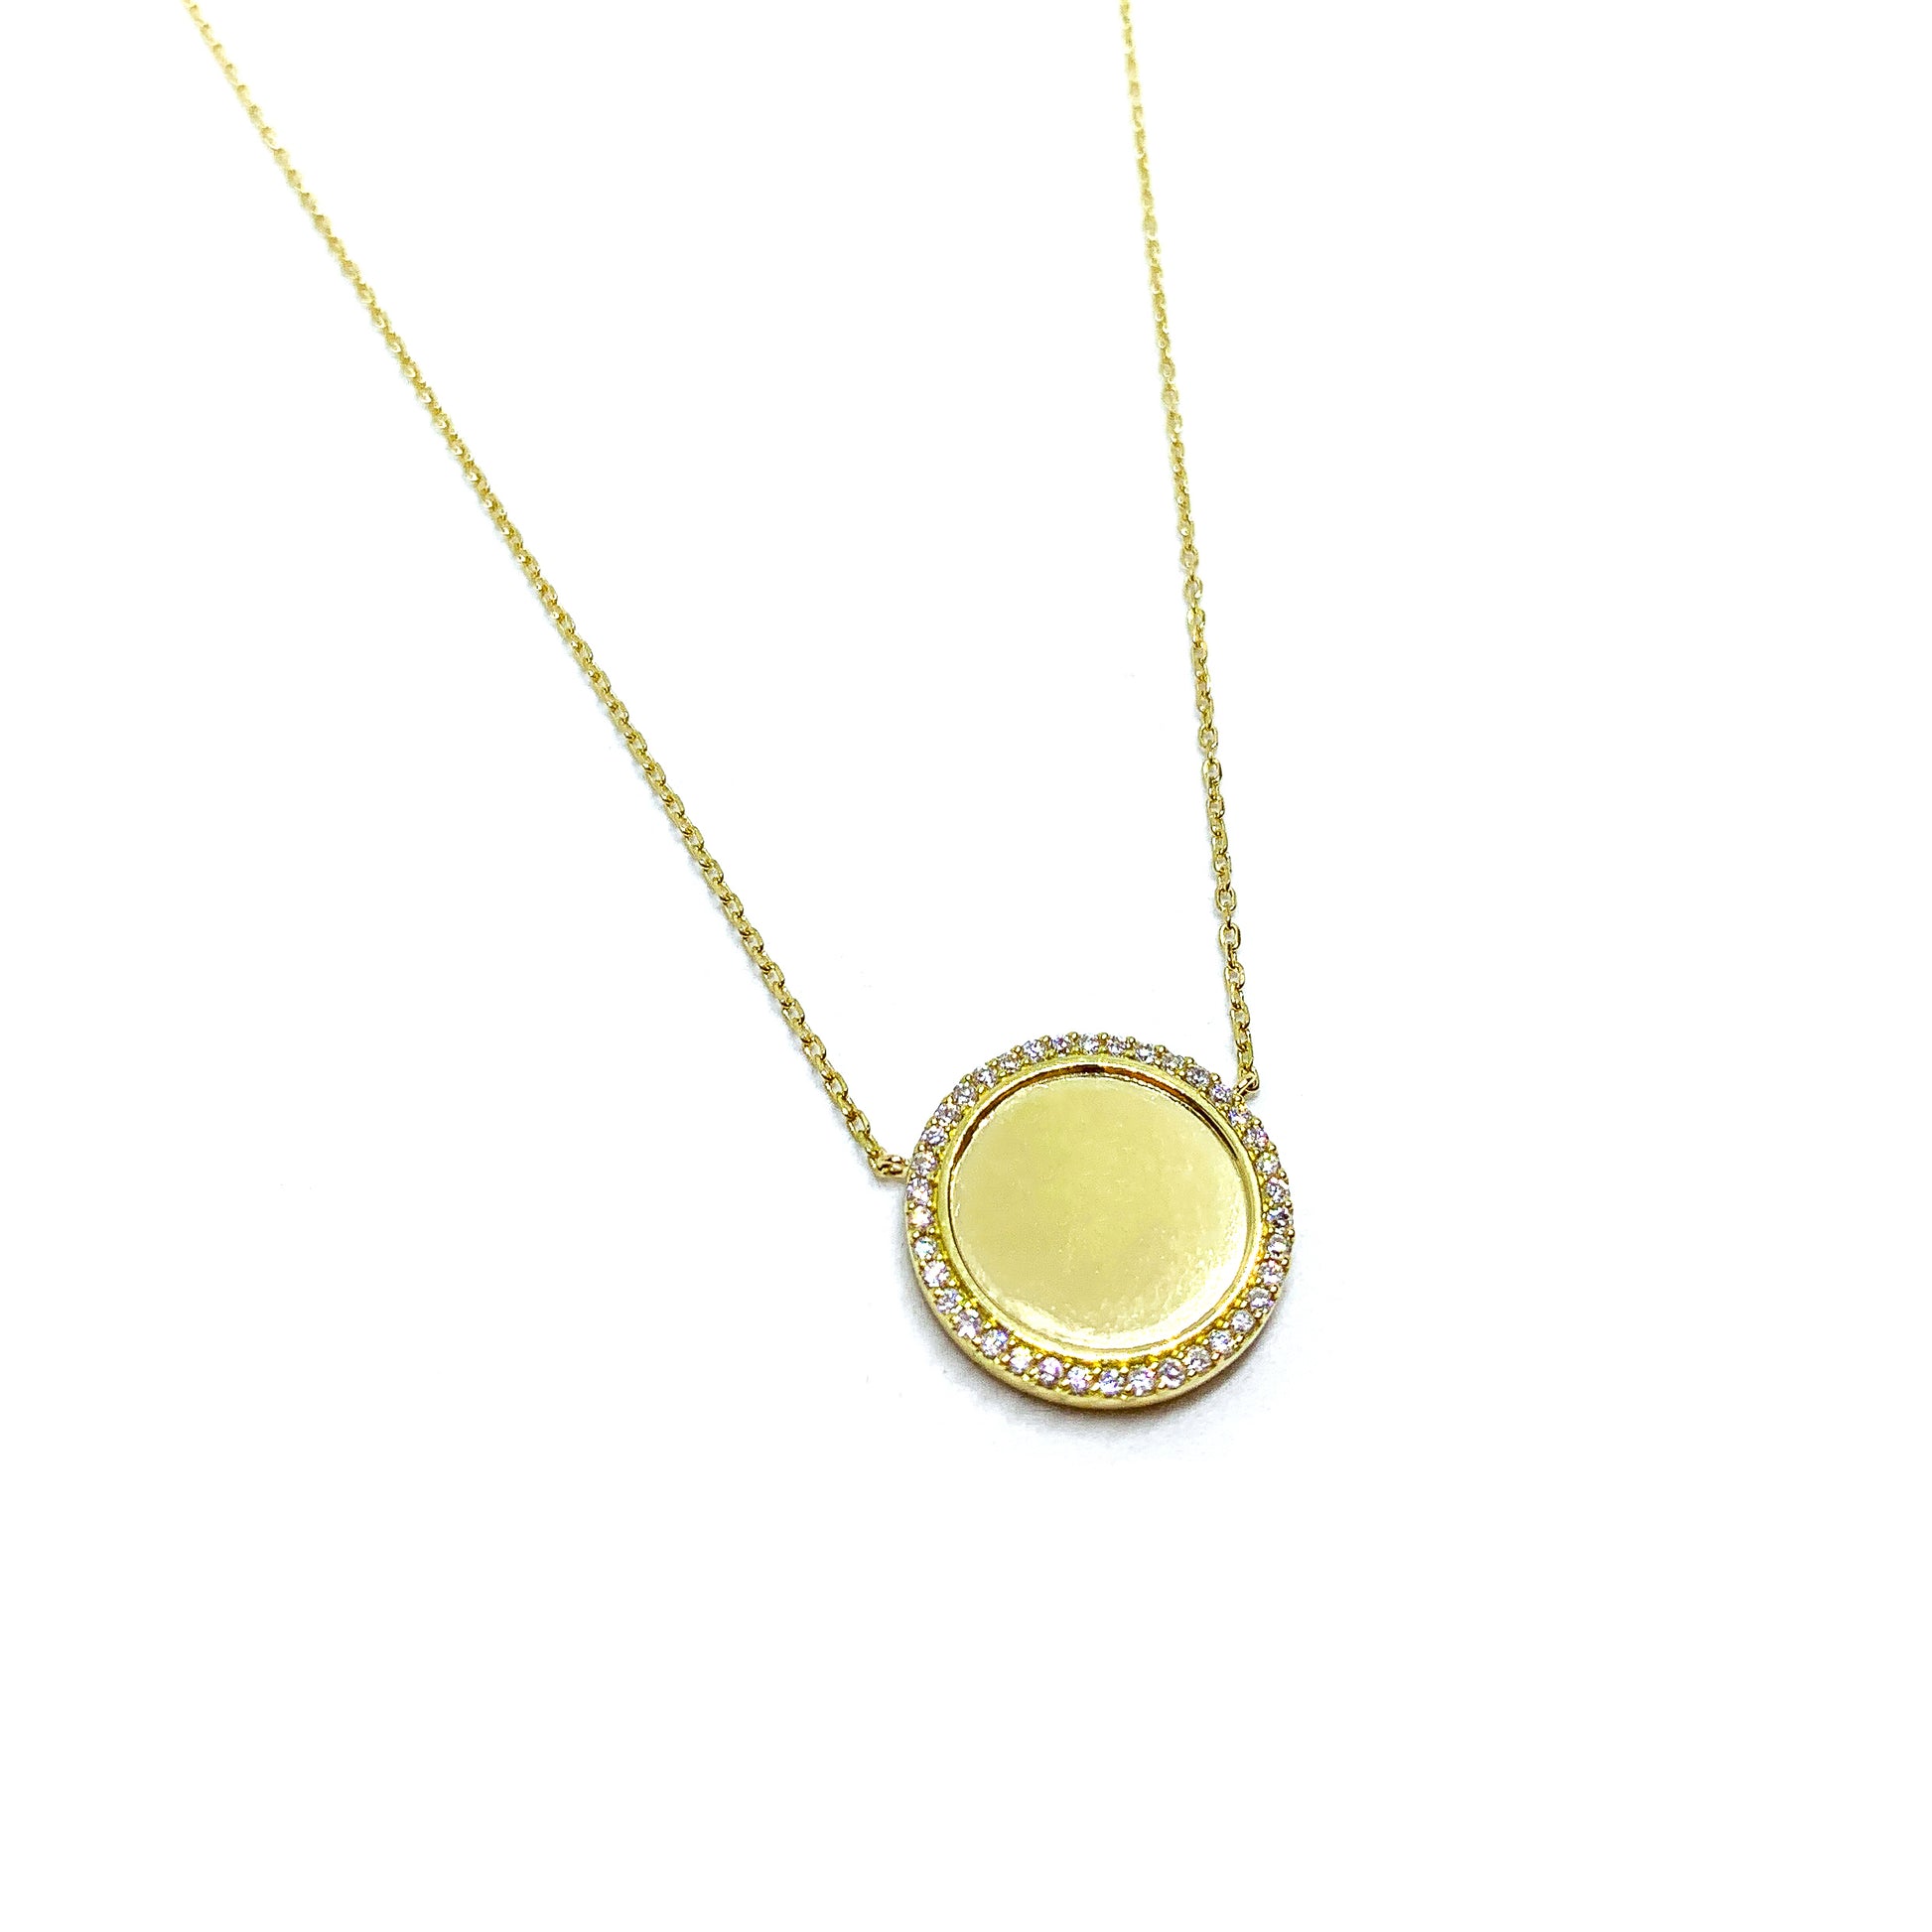 engraved coin necklace